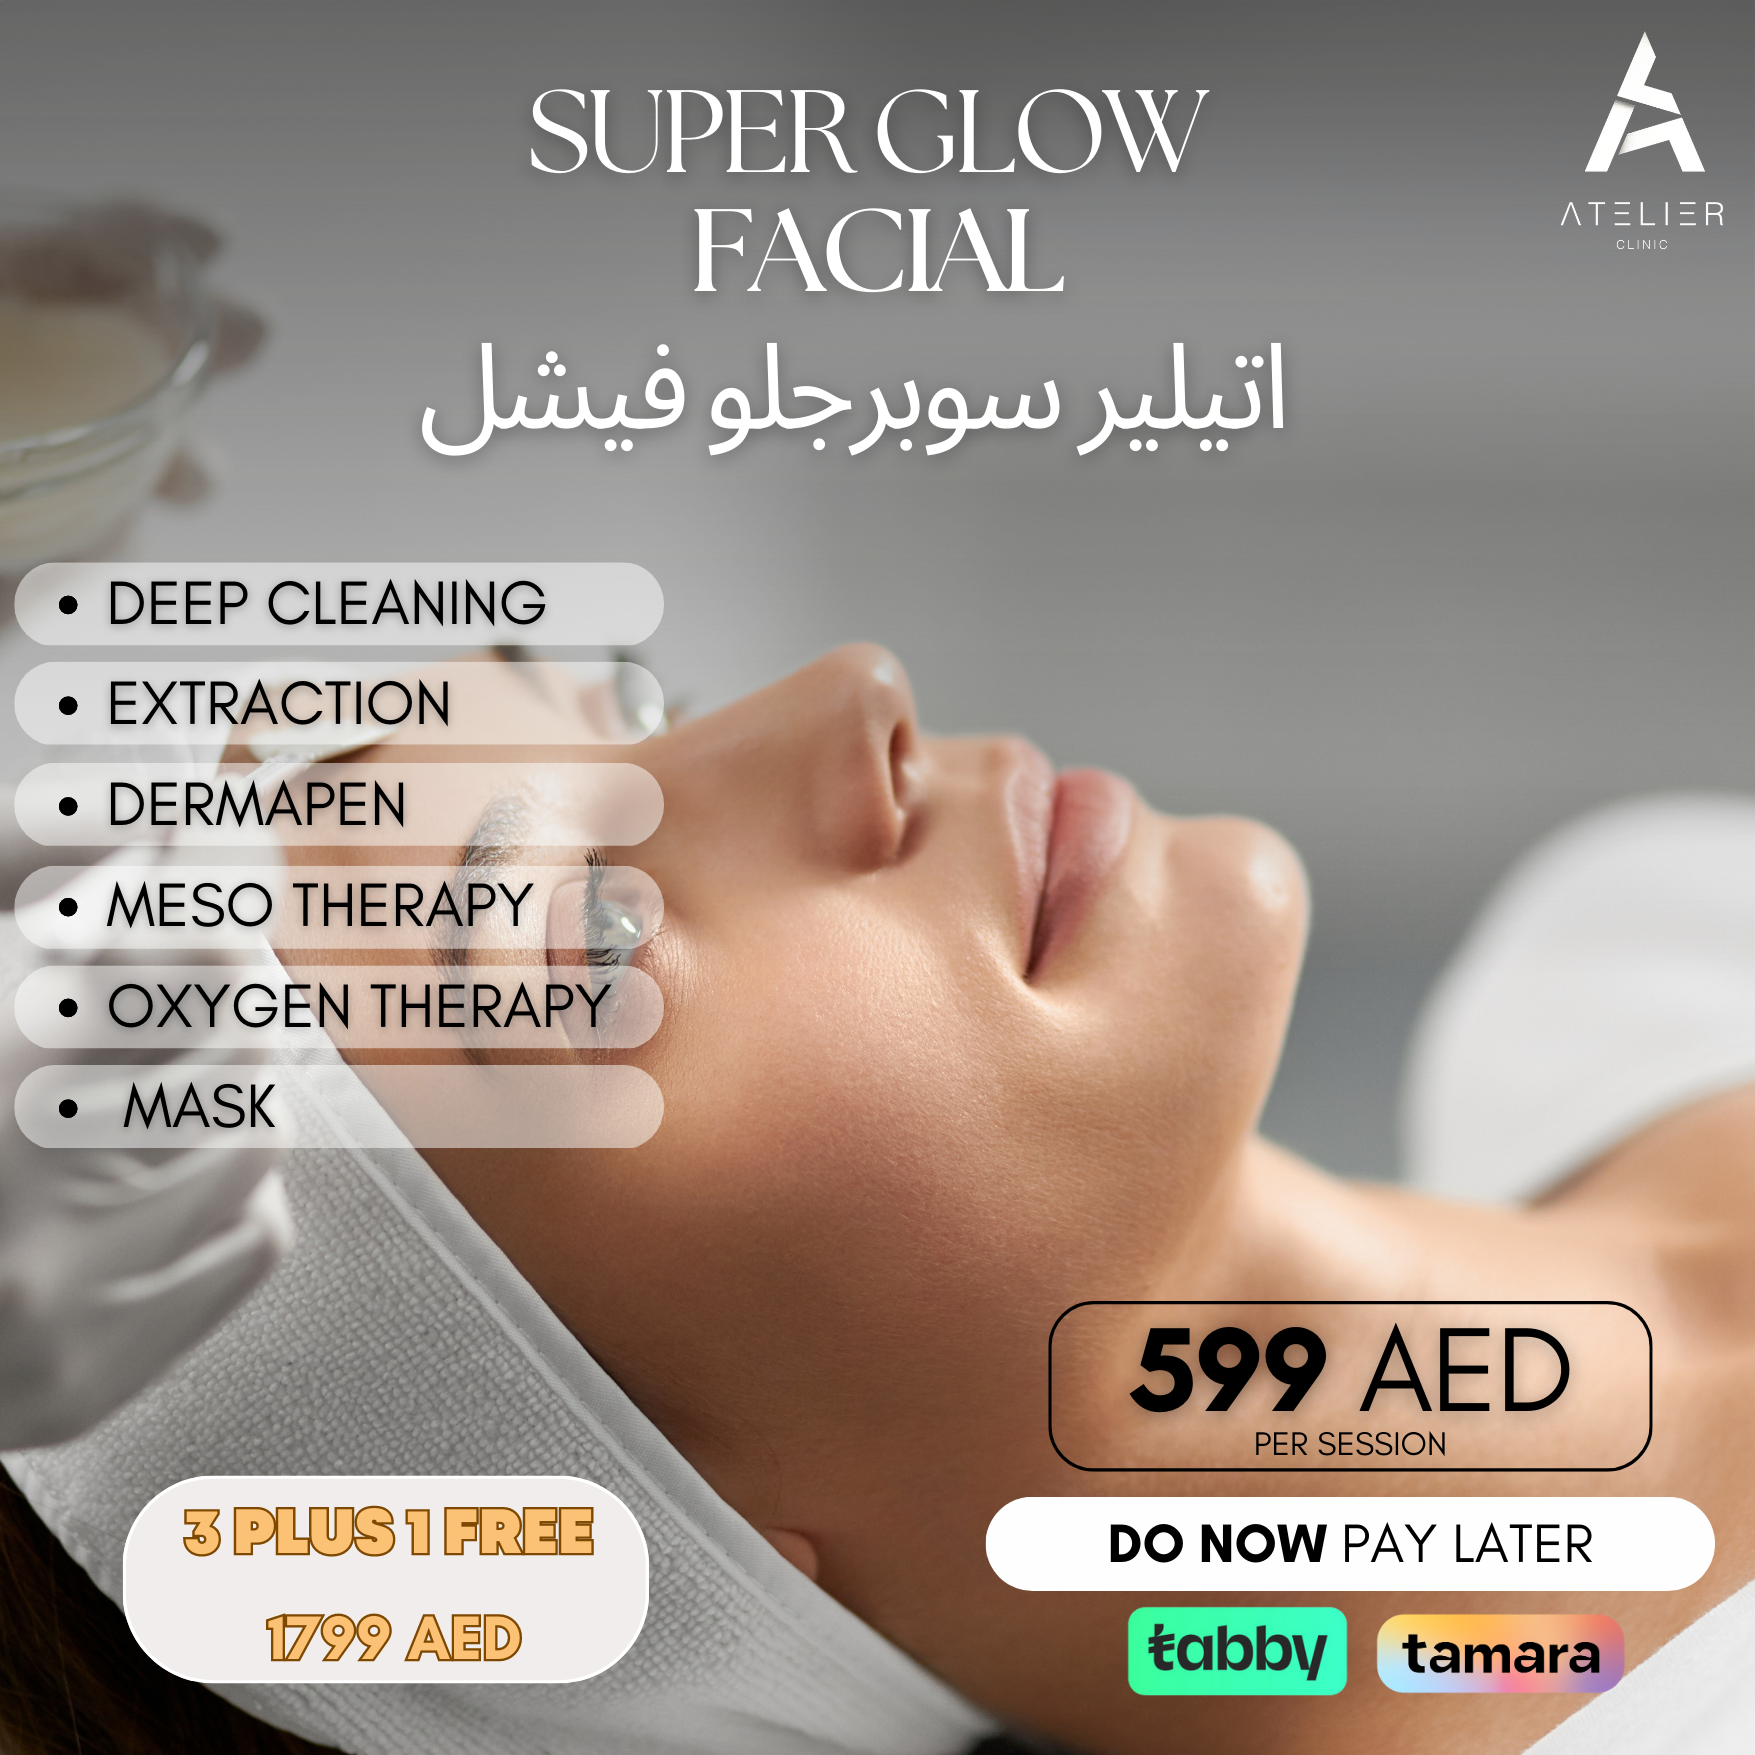 Super Glow Facial Package